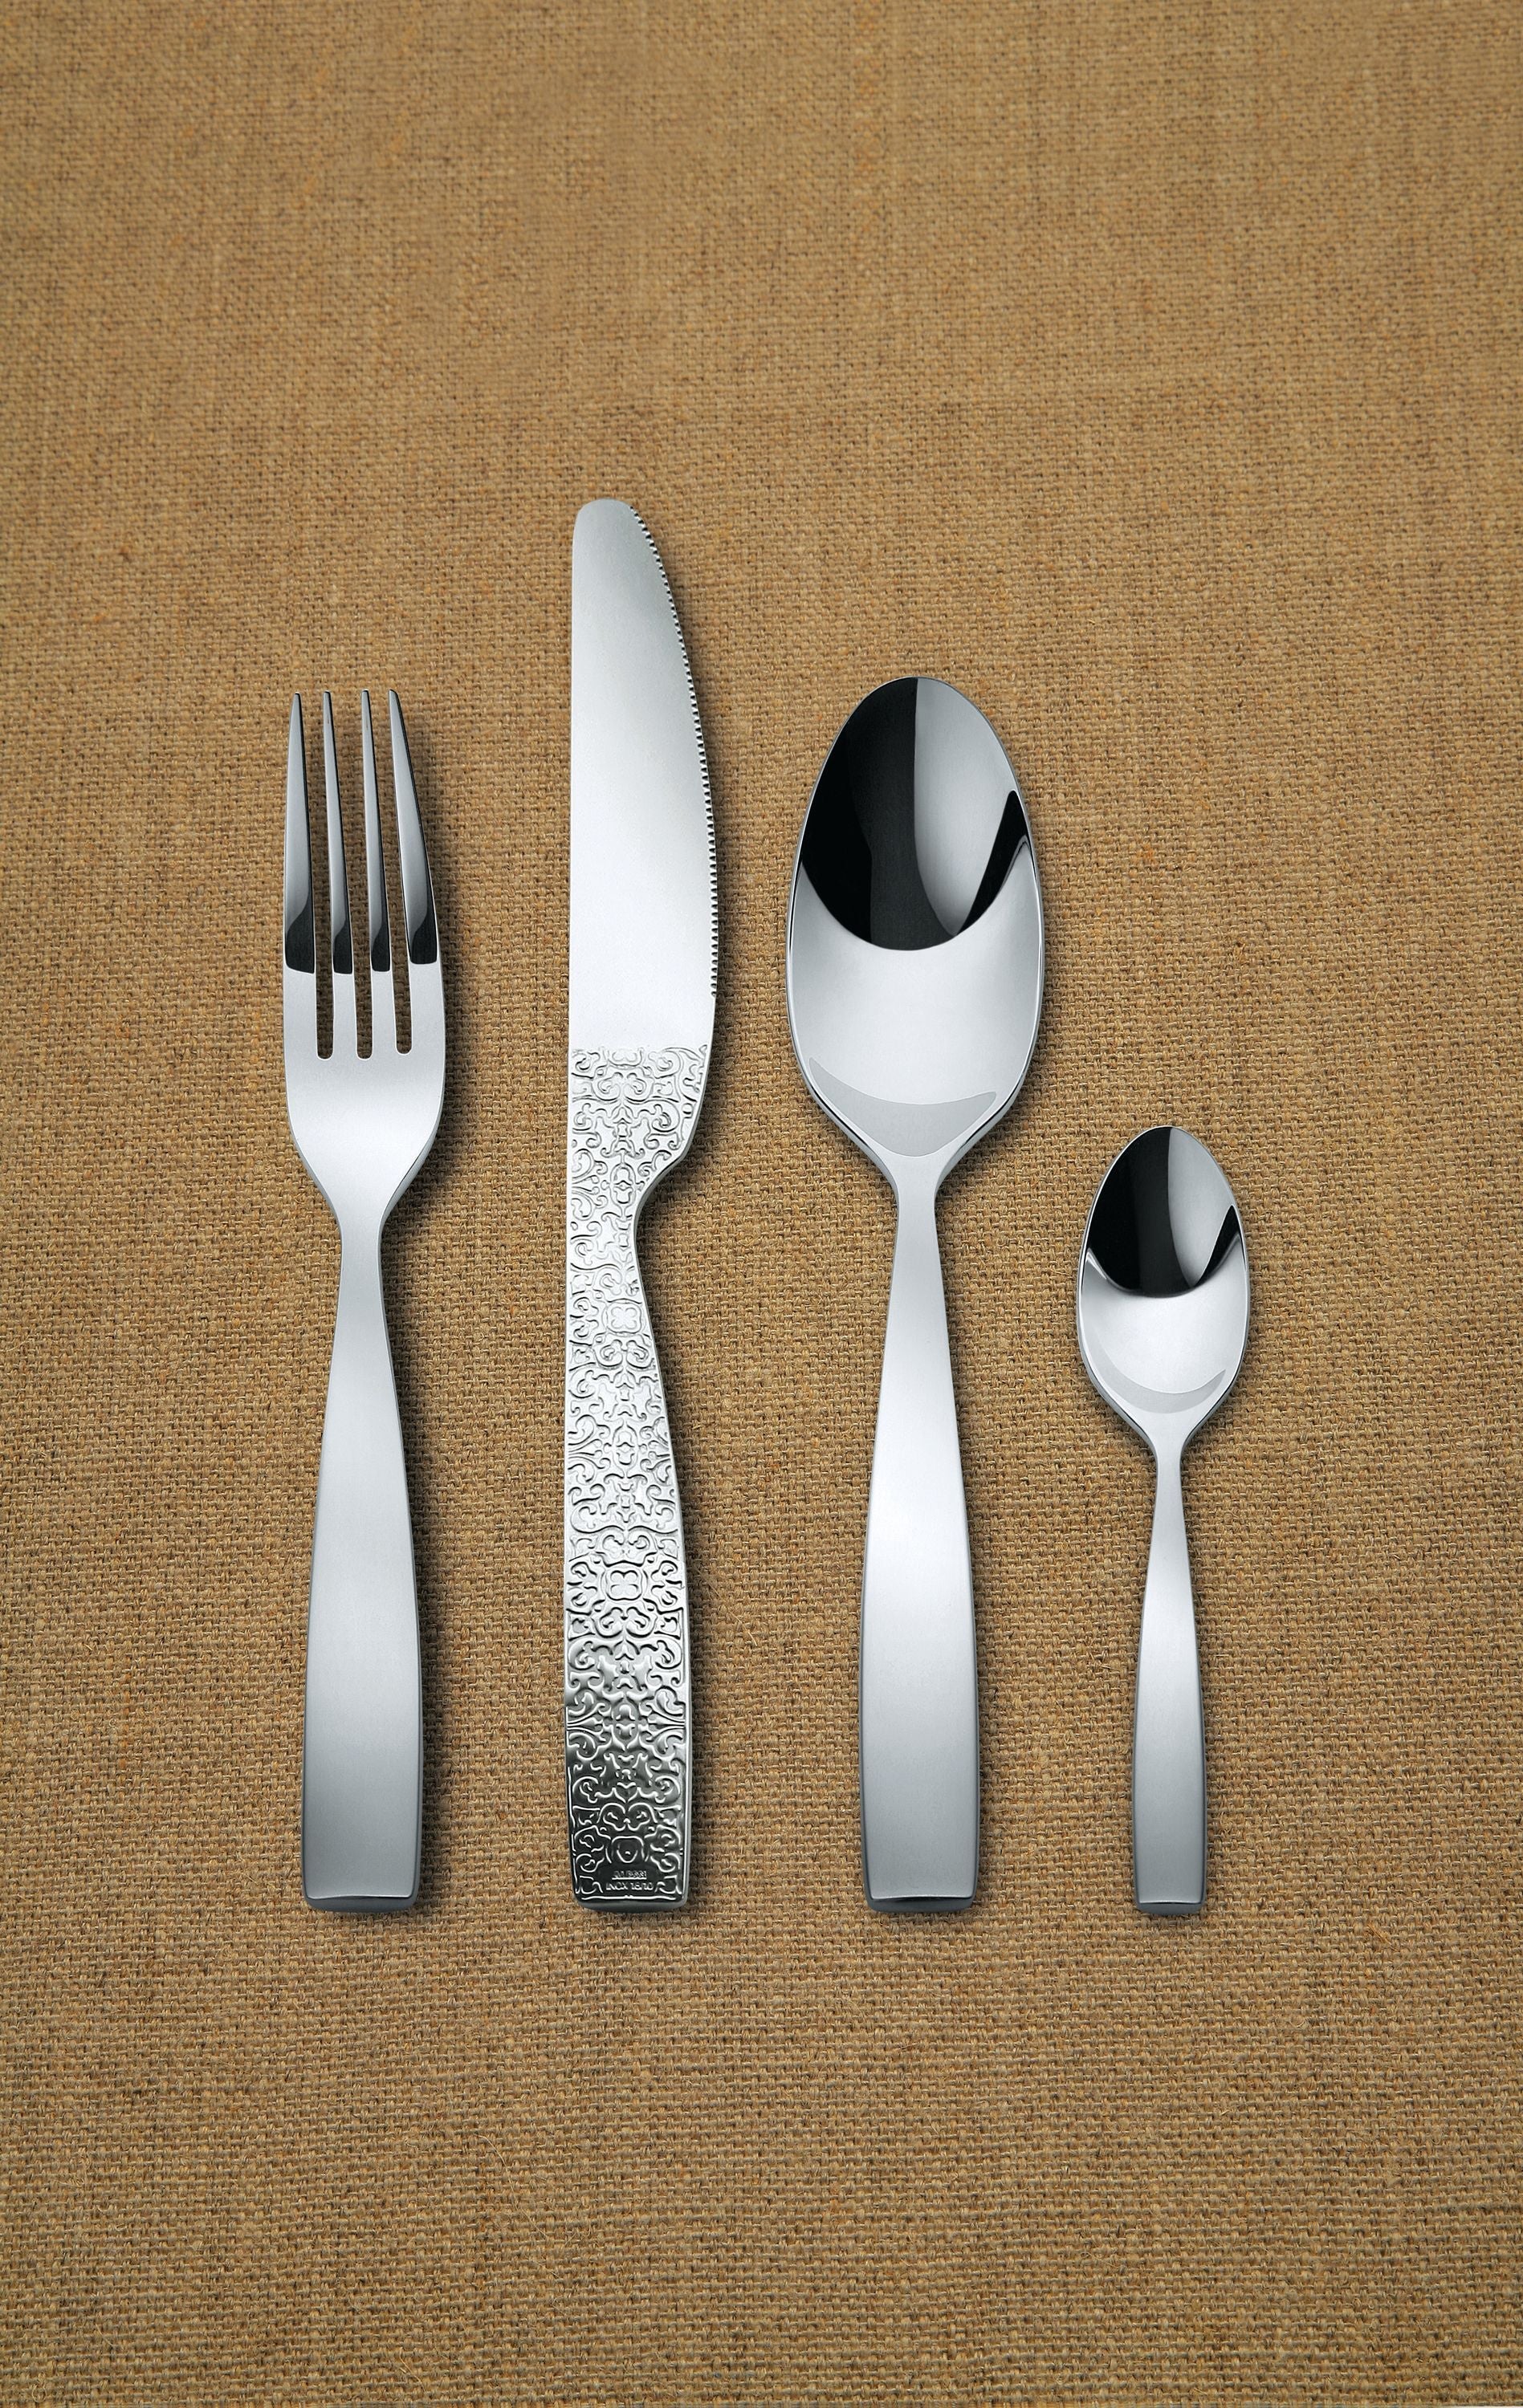 Alessi "Dressed" Cutlery Set, 24 Pieces